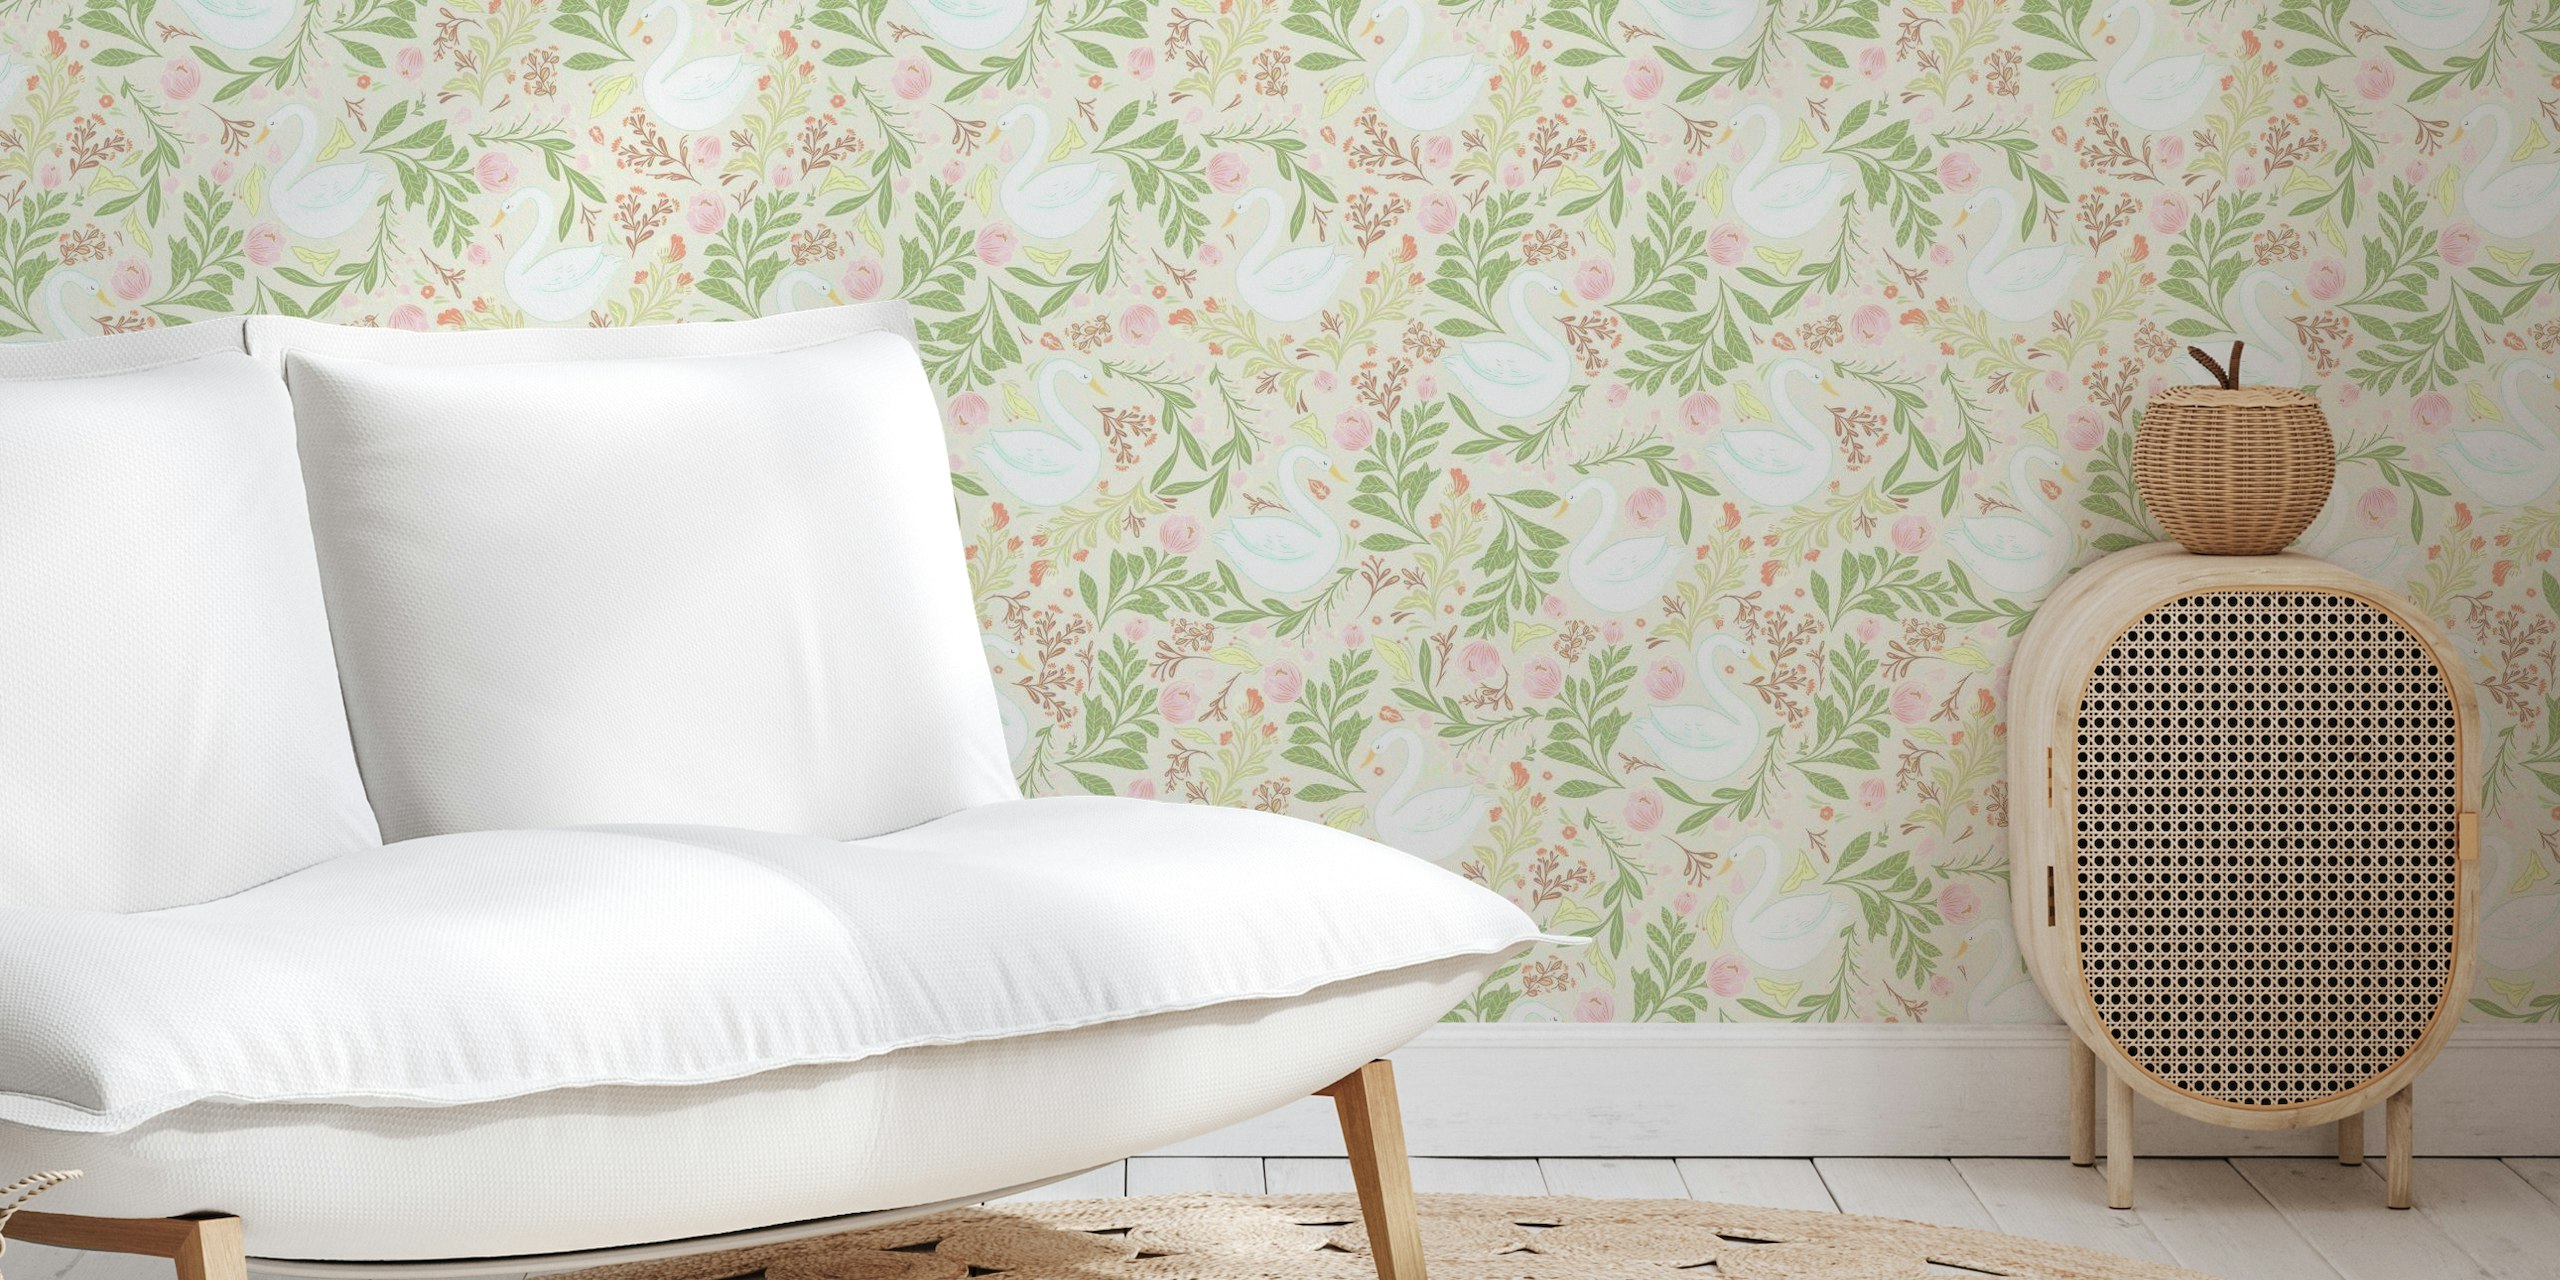 Whimsical swans and flower wallpaper